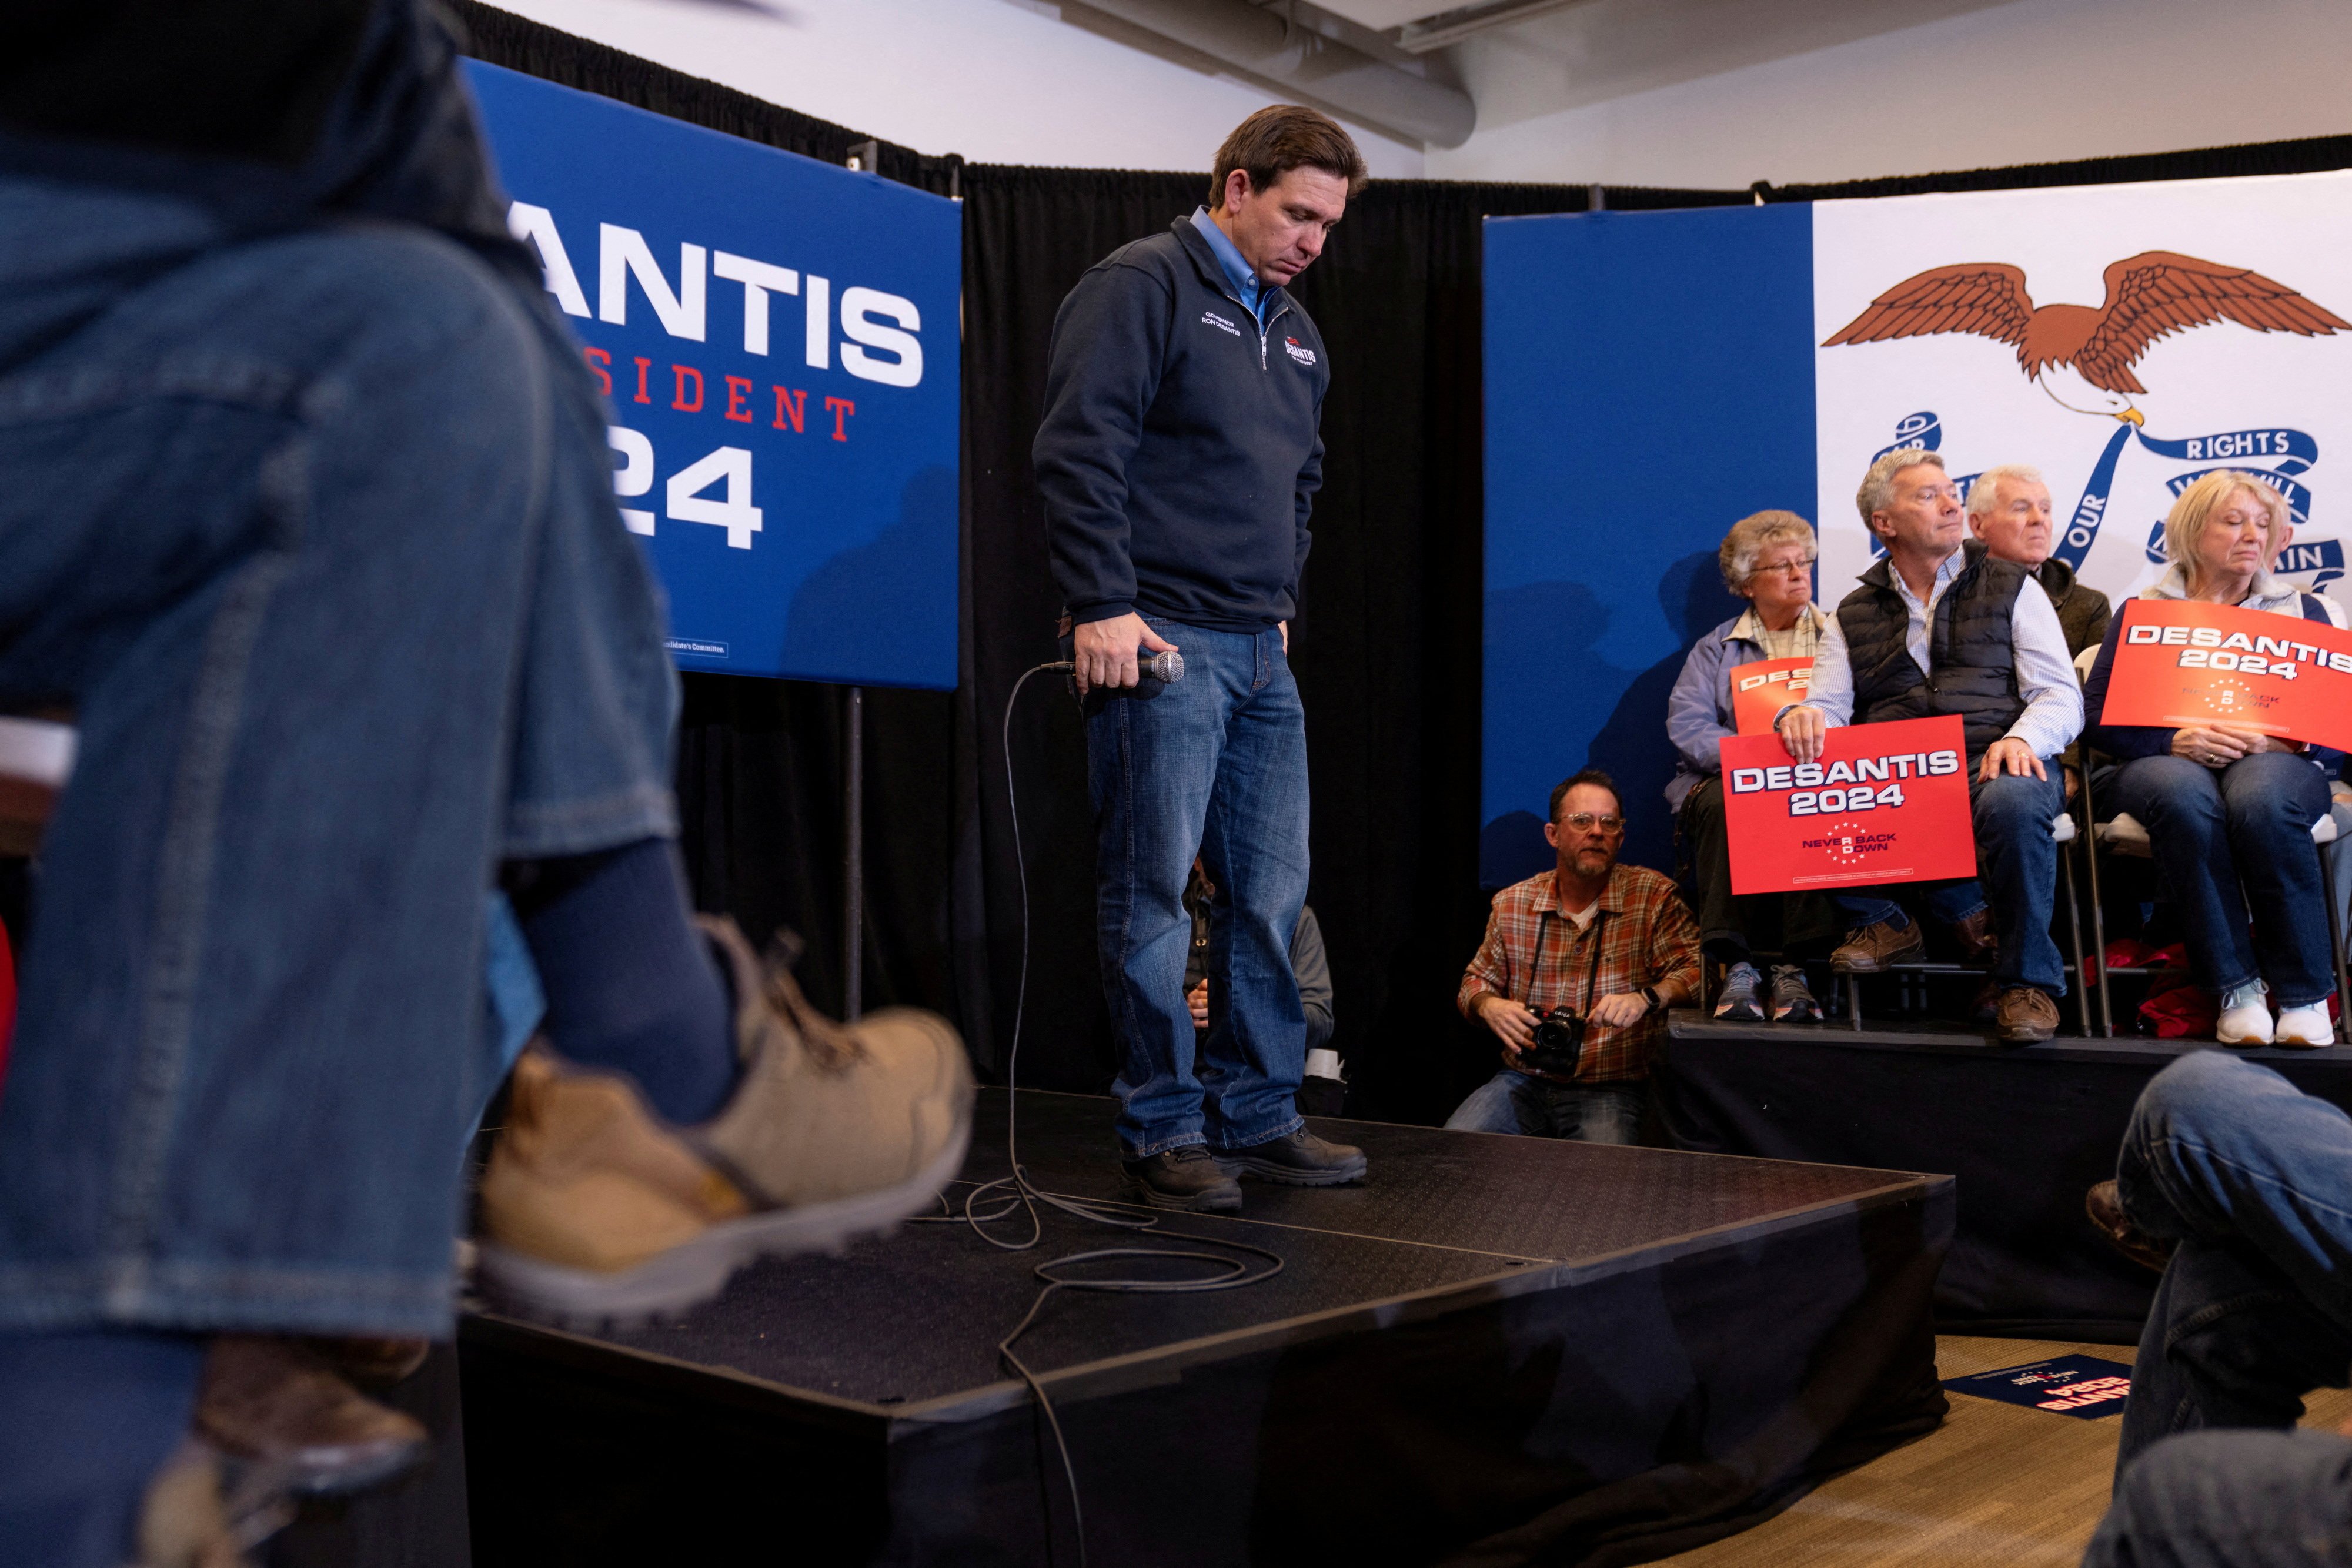 Ron DeSantis listens to a question from an audience member at a campaign event in Waukee, Iowa, earlier this month. Photo: Reuters